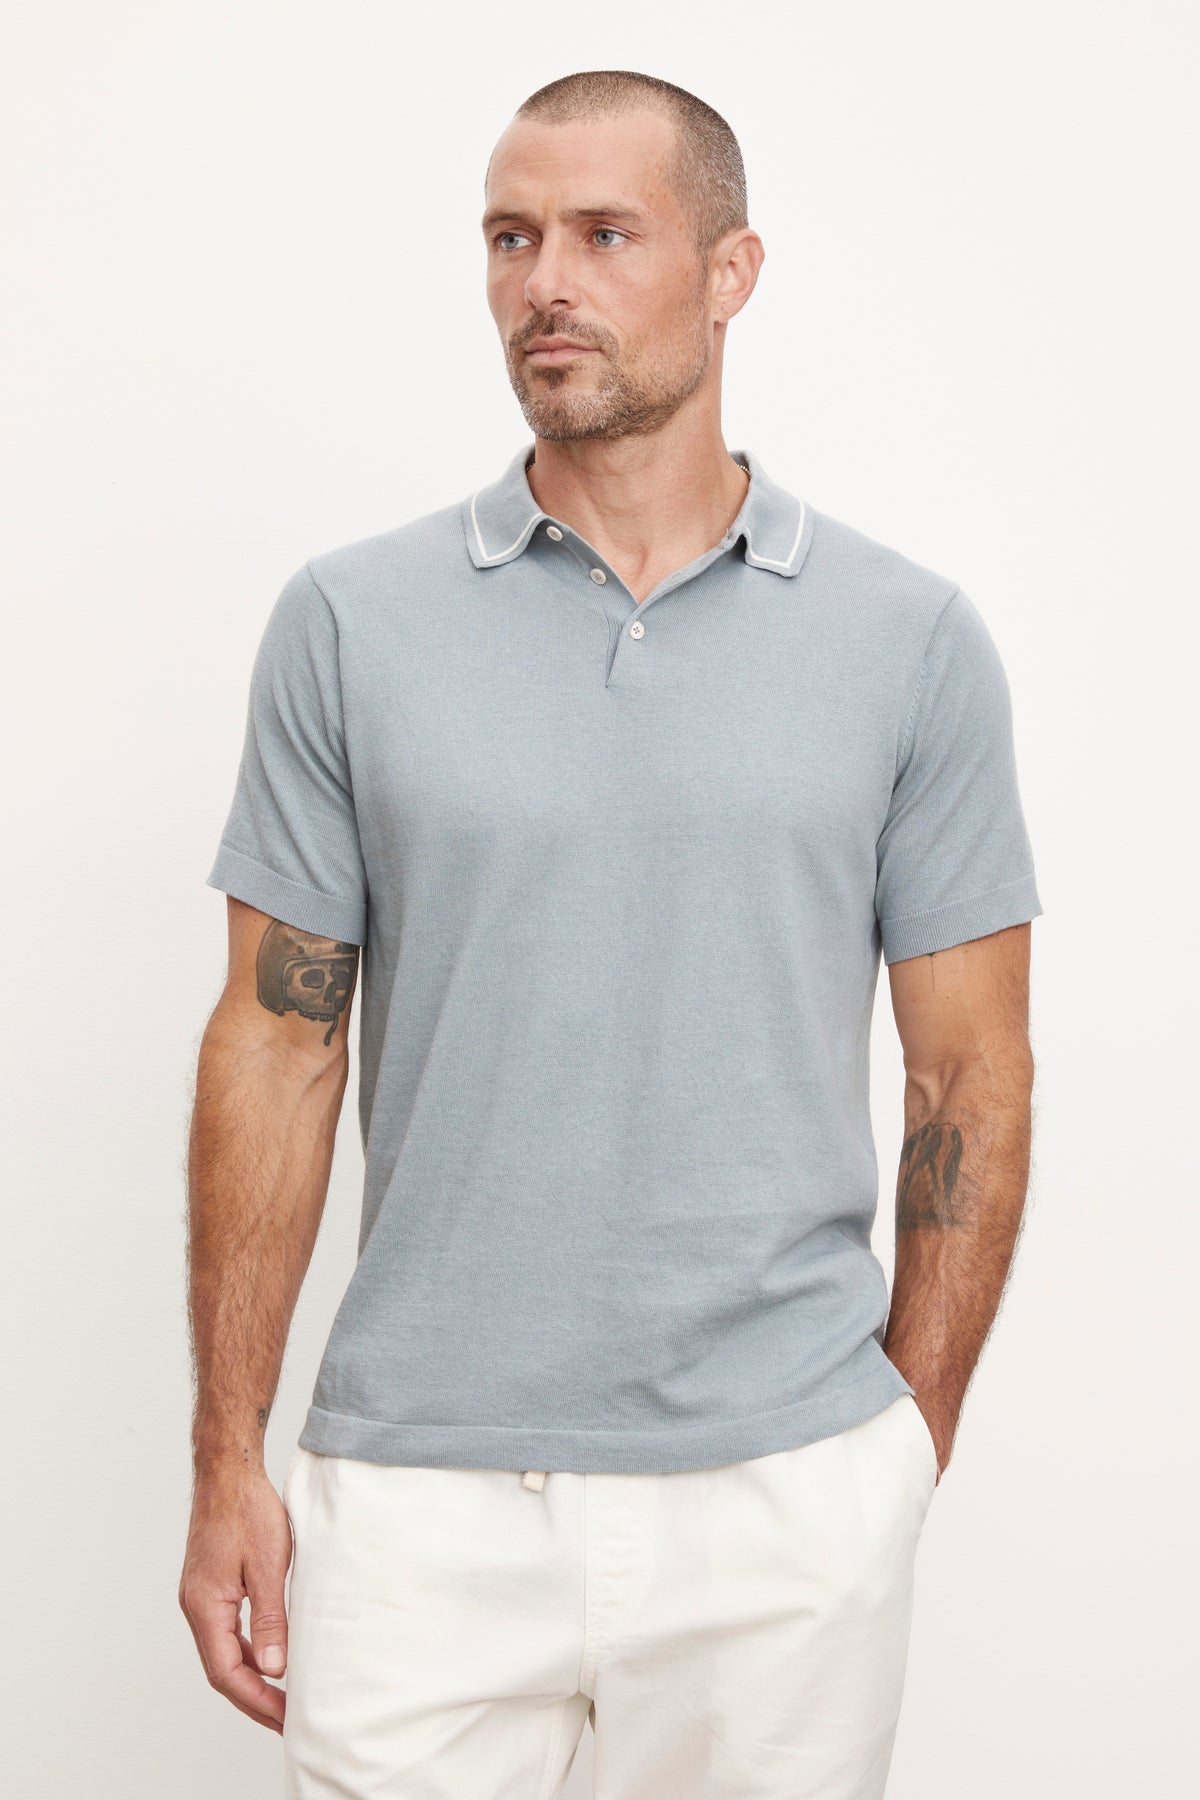   Man in a Velvet by Graham & Spencer Shepard Polo shirt and white pants, looking to the side with visible tattoos on both arms. 